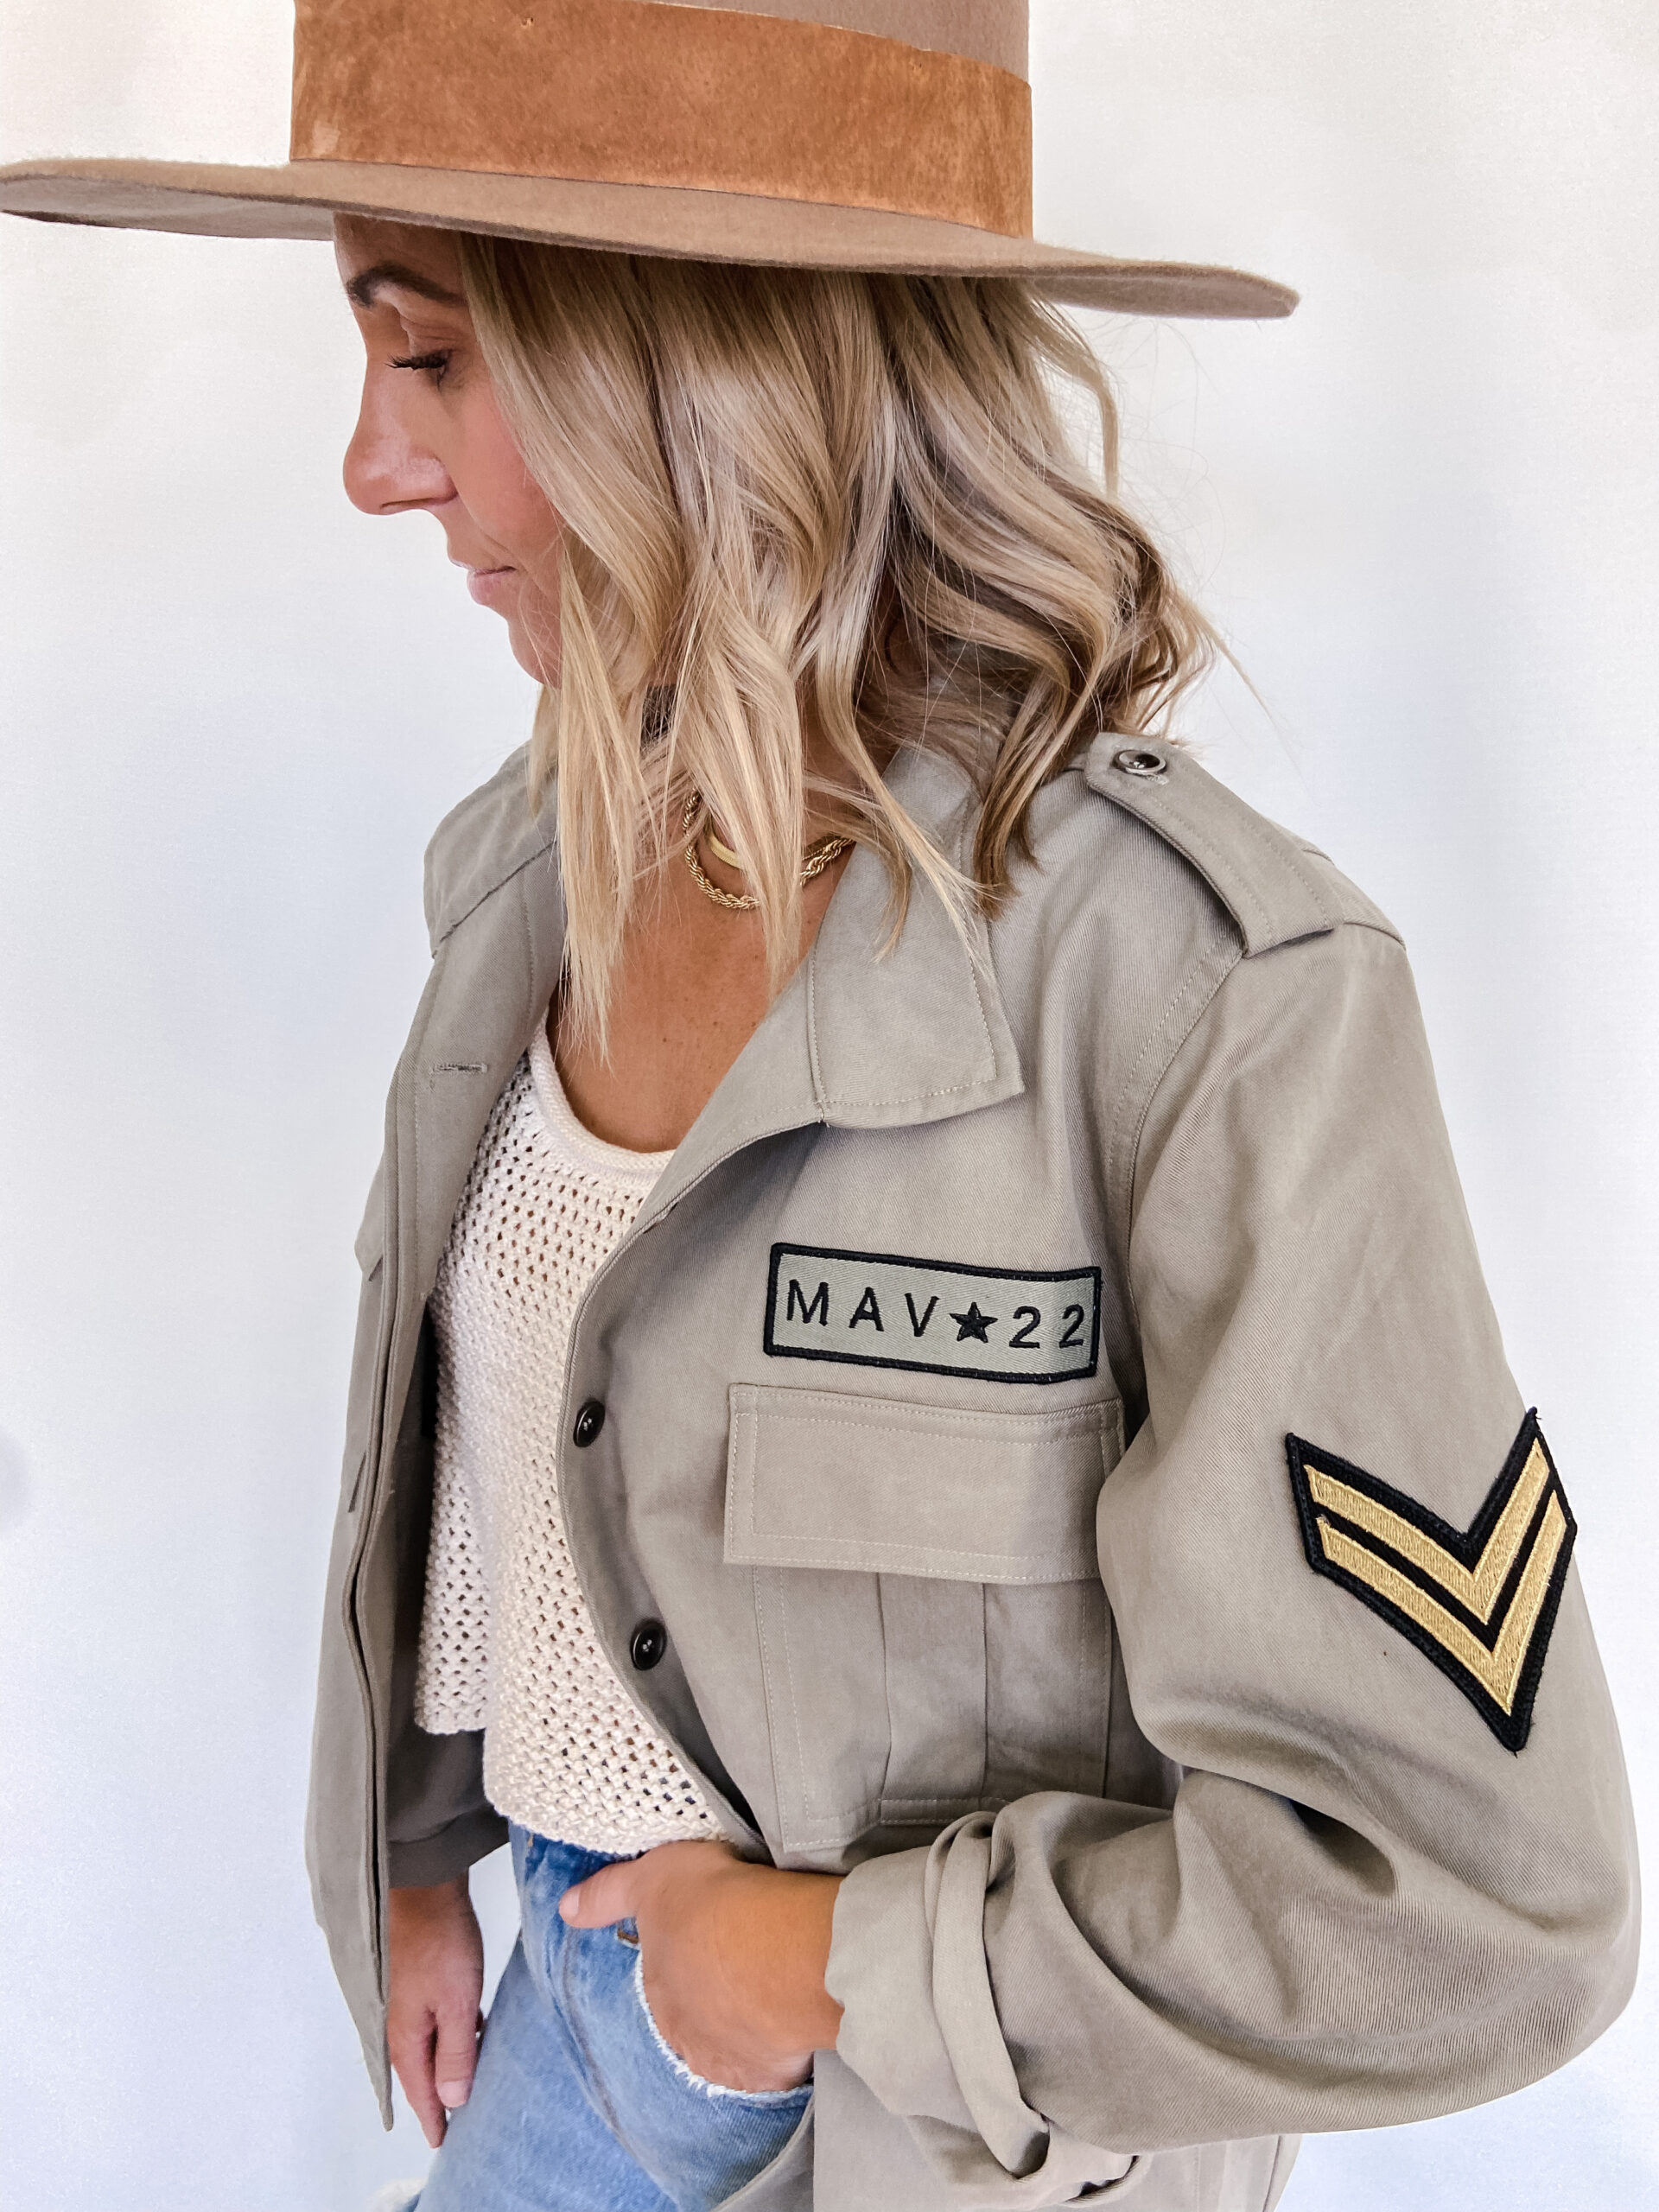 Mavi Riot-Jaclyn De Leon Style. Launching my own clothing line. The Mavi Riot girl is boho chic with a little bit of edge. The Maverick Utility jacket can be worn on any occasion.